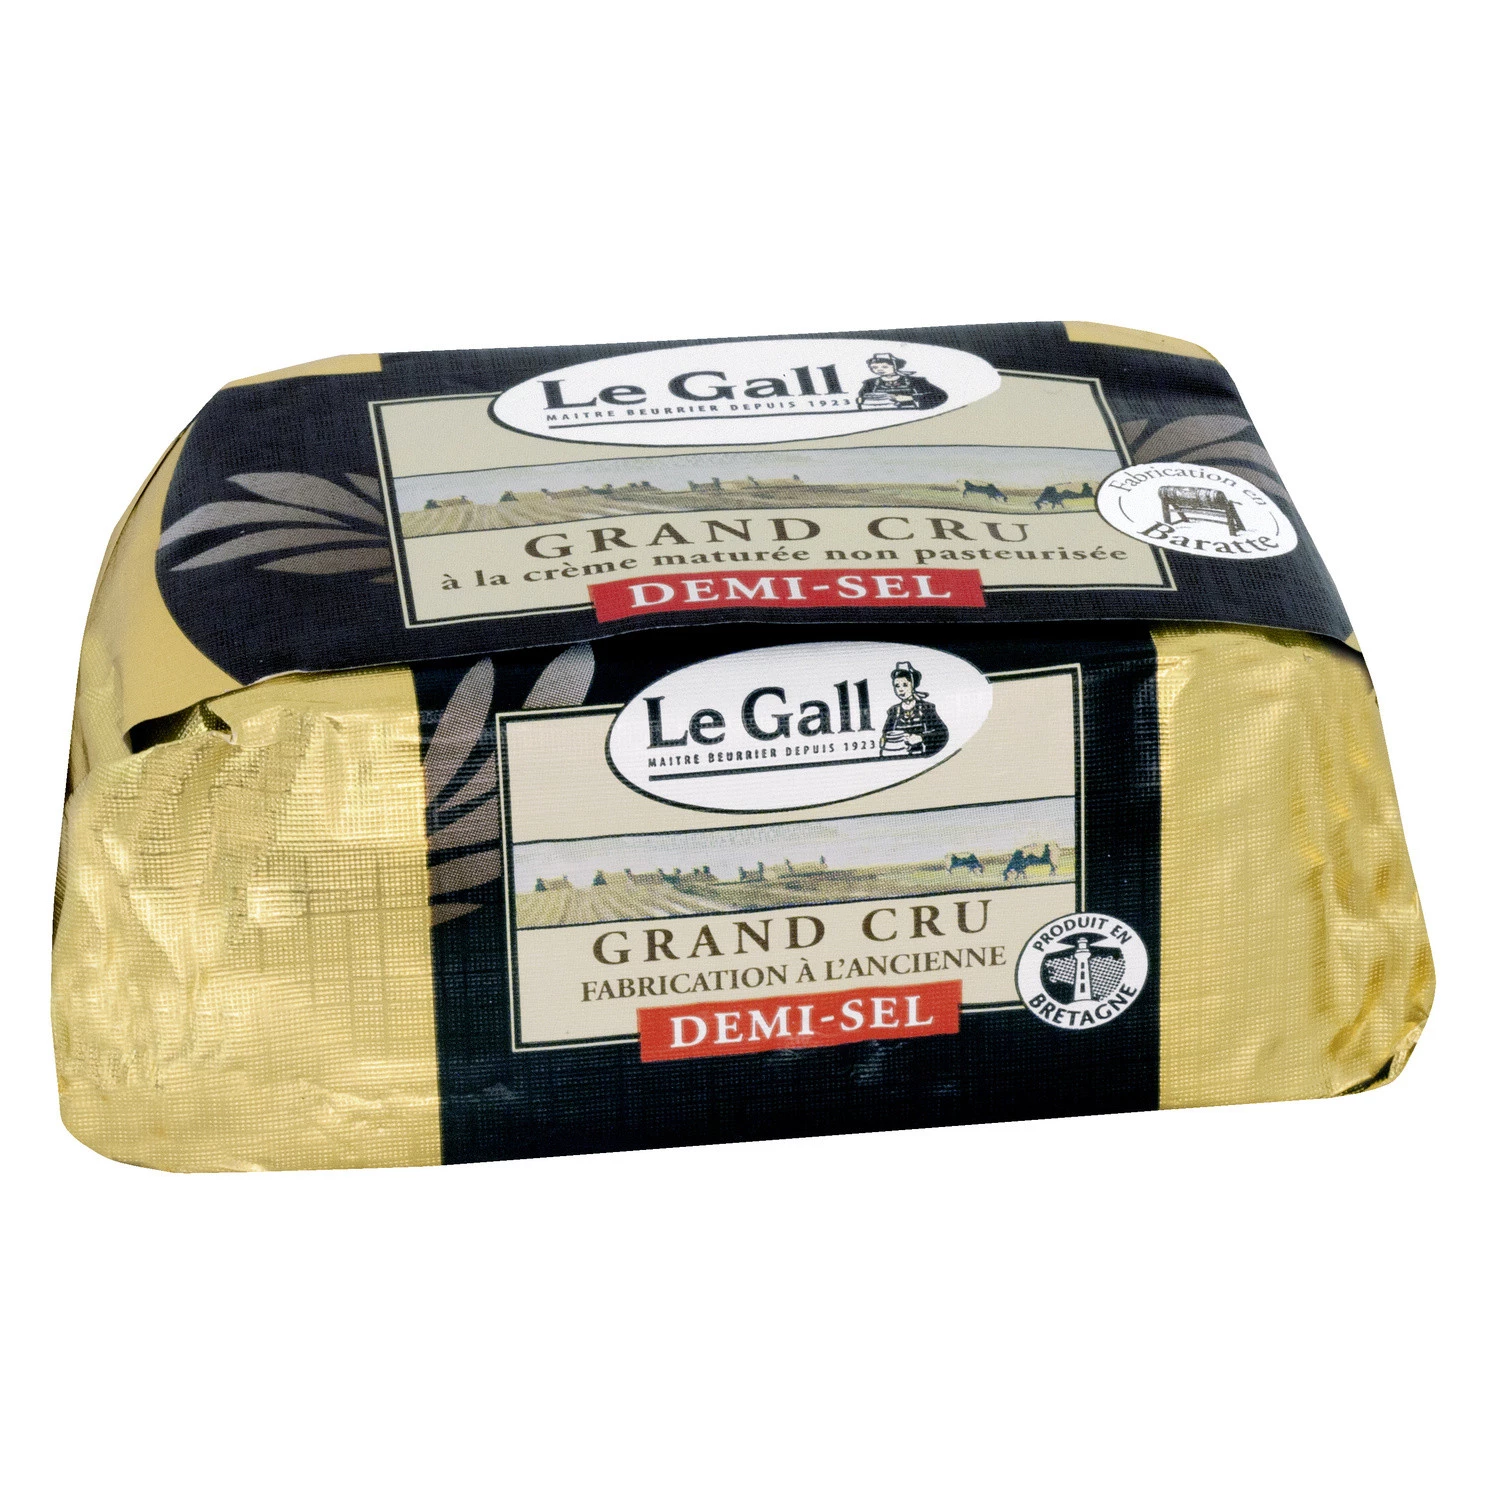 Le Gall Baratte RAW butter salted 250g